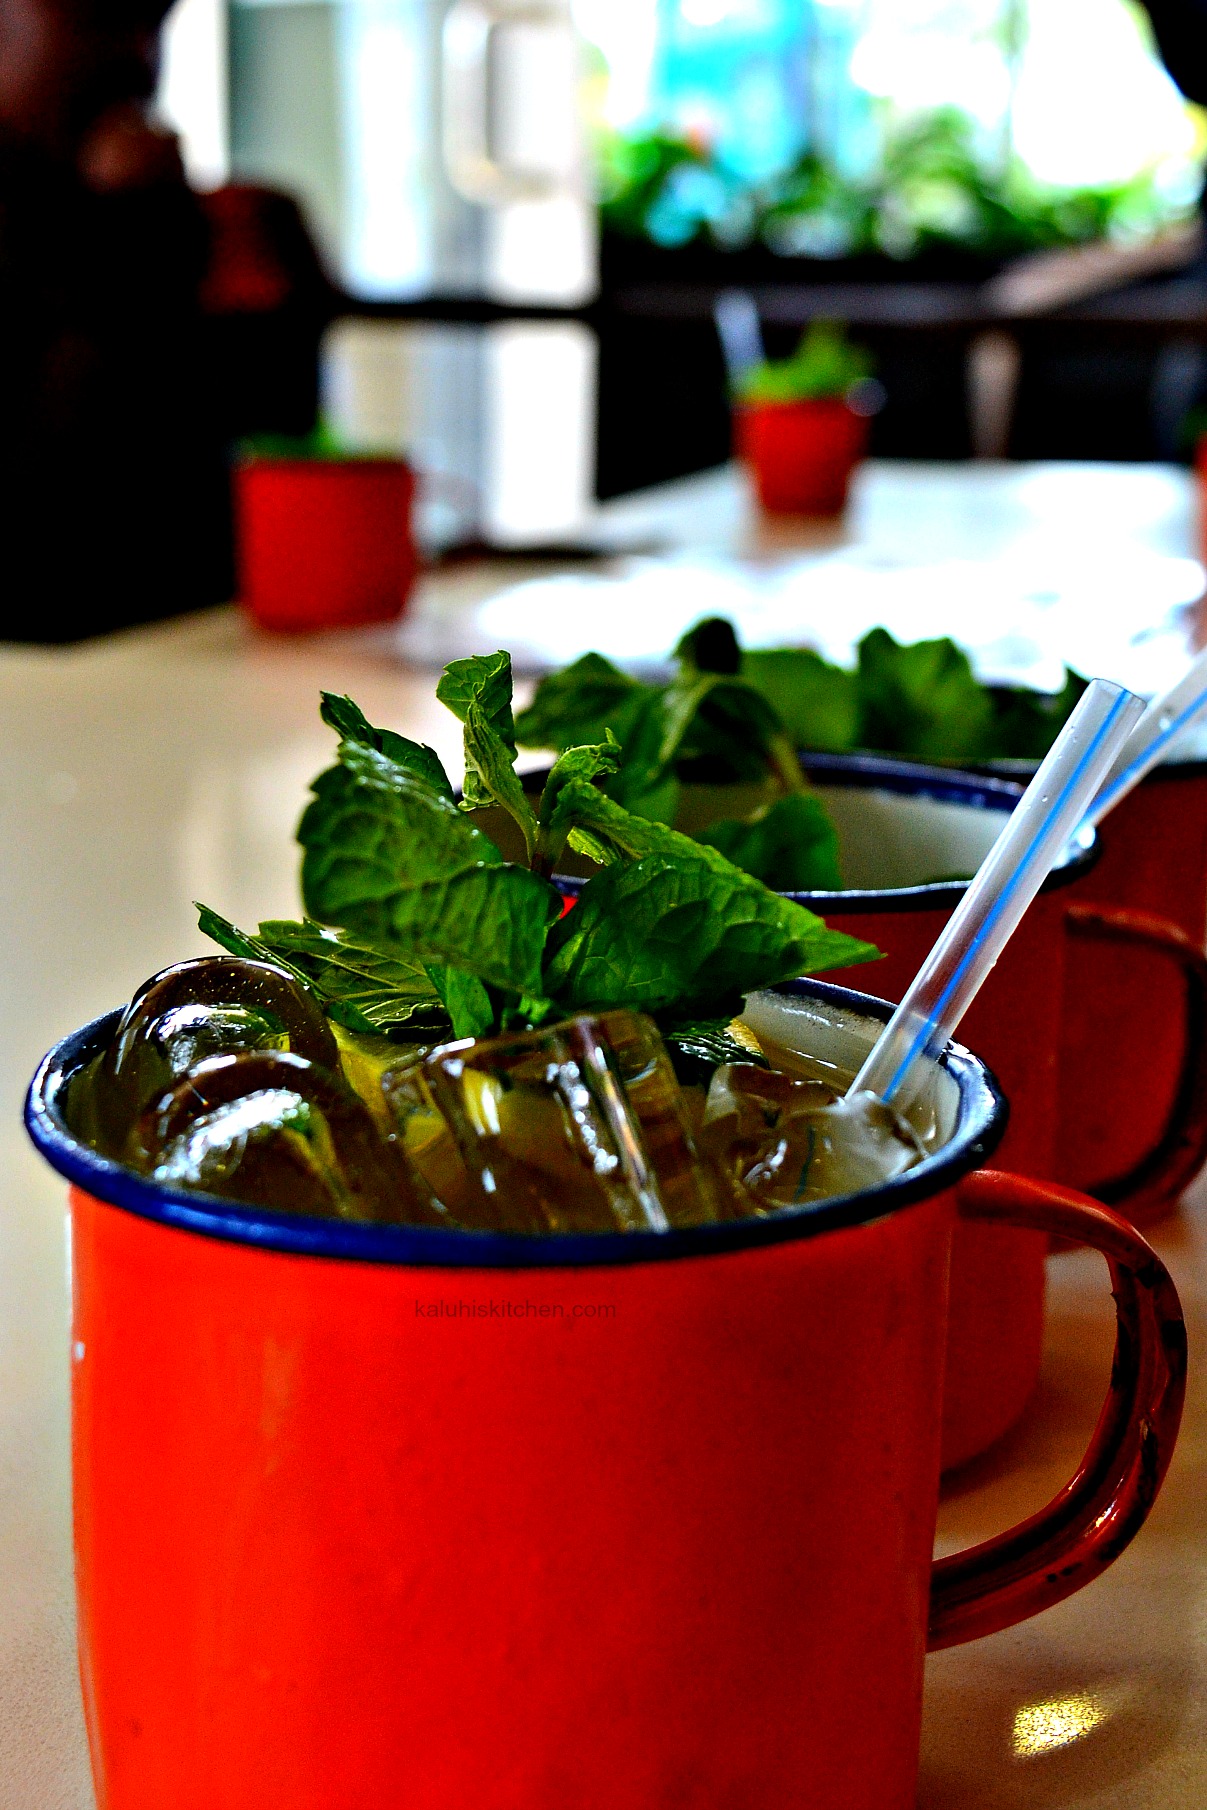 Mama's Mule: Ketel one vodka, Kisampa honey, fresh ginger, lime and mint. This was my favorite drink. I especially enjoyed the sweetness of the honey against the subtle sourness of the limes.